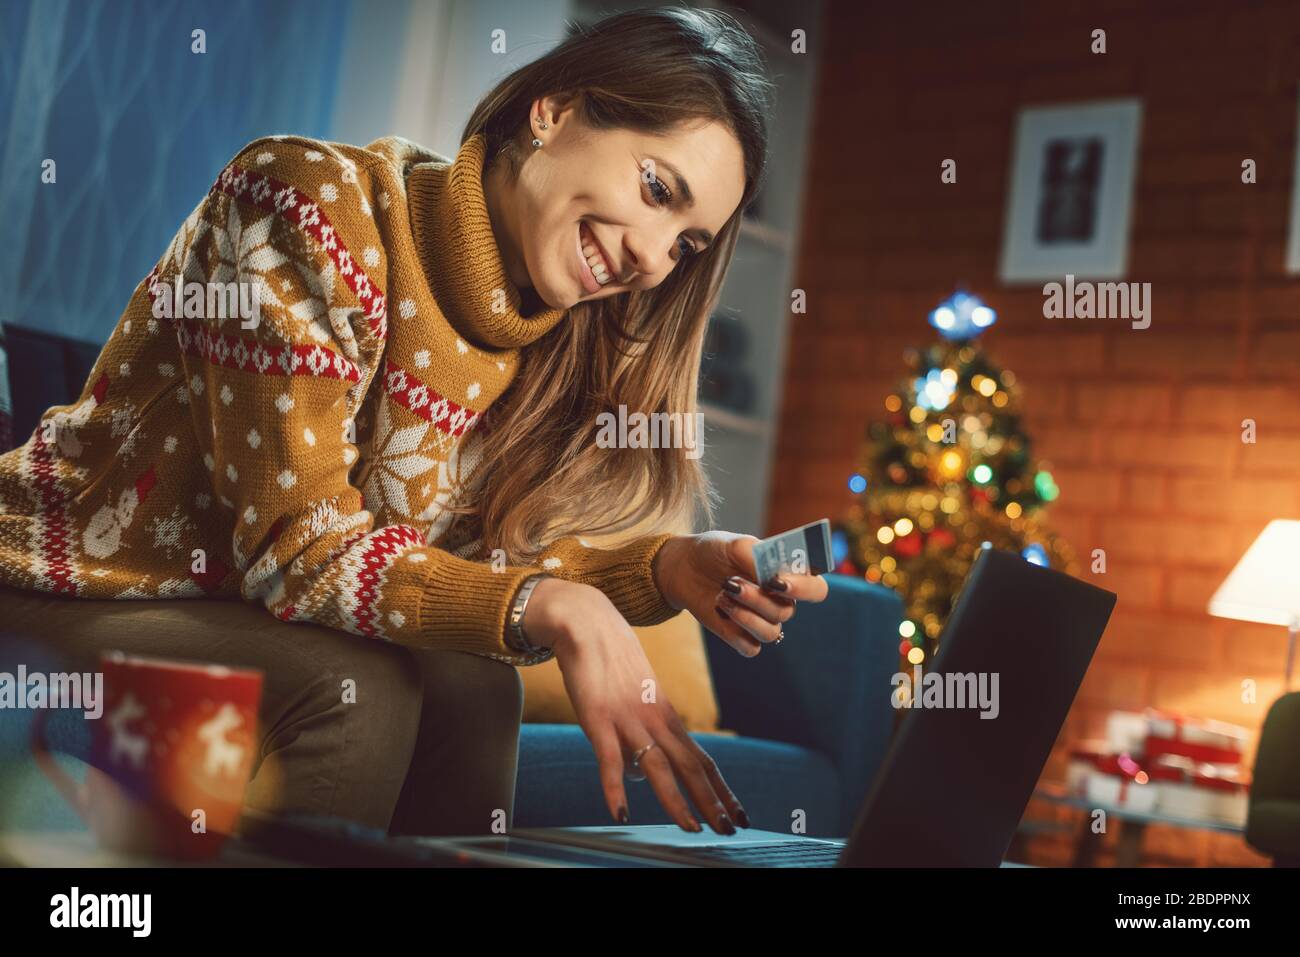 Happy woman relaxing on the sofa at home and doing online shopping, Christmas tree in the background Stock Photo